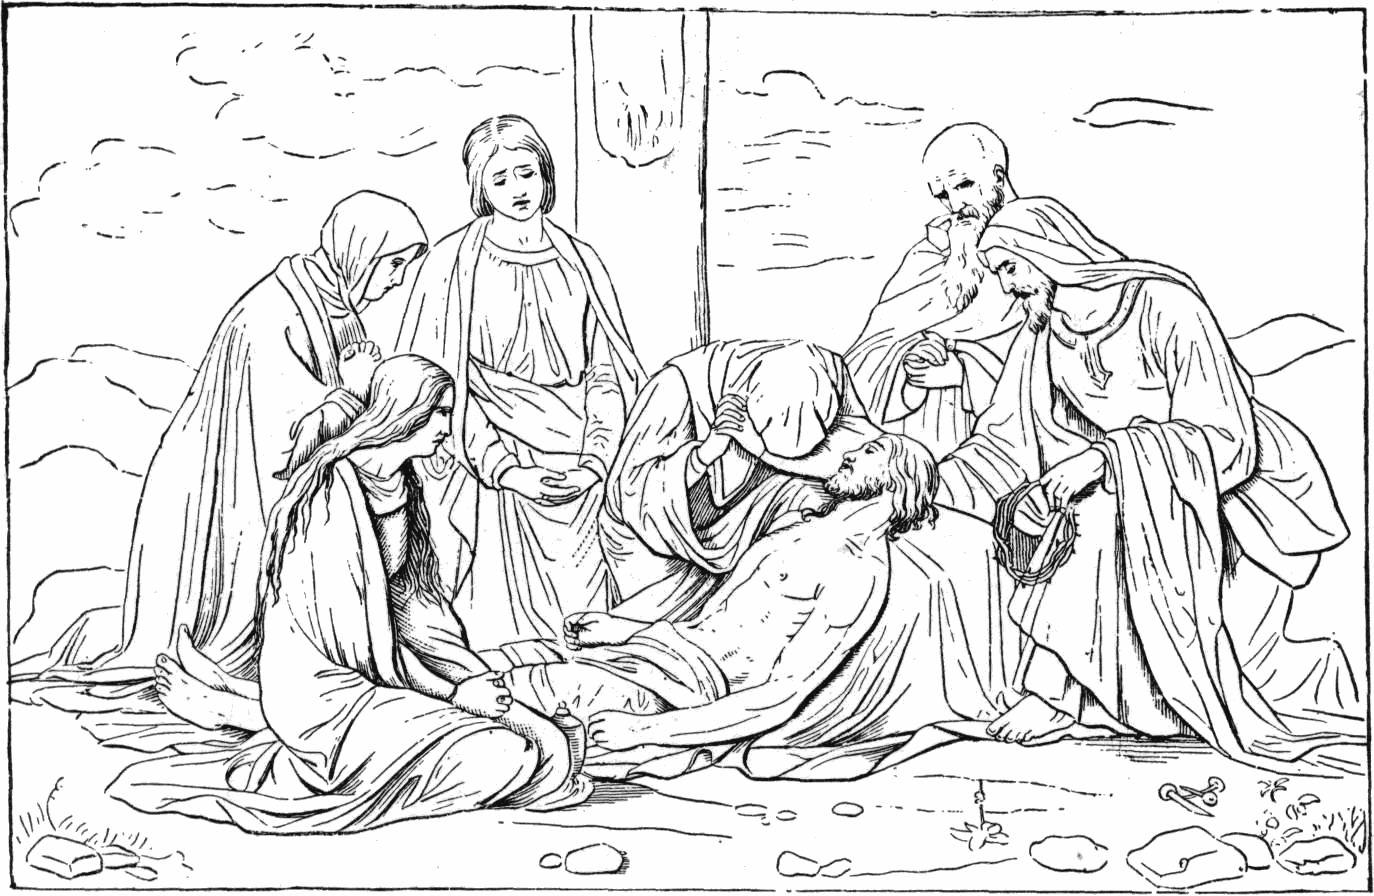 Good Friday Coloring Pages